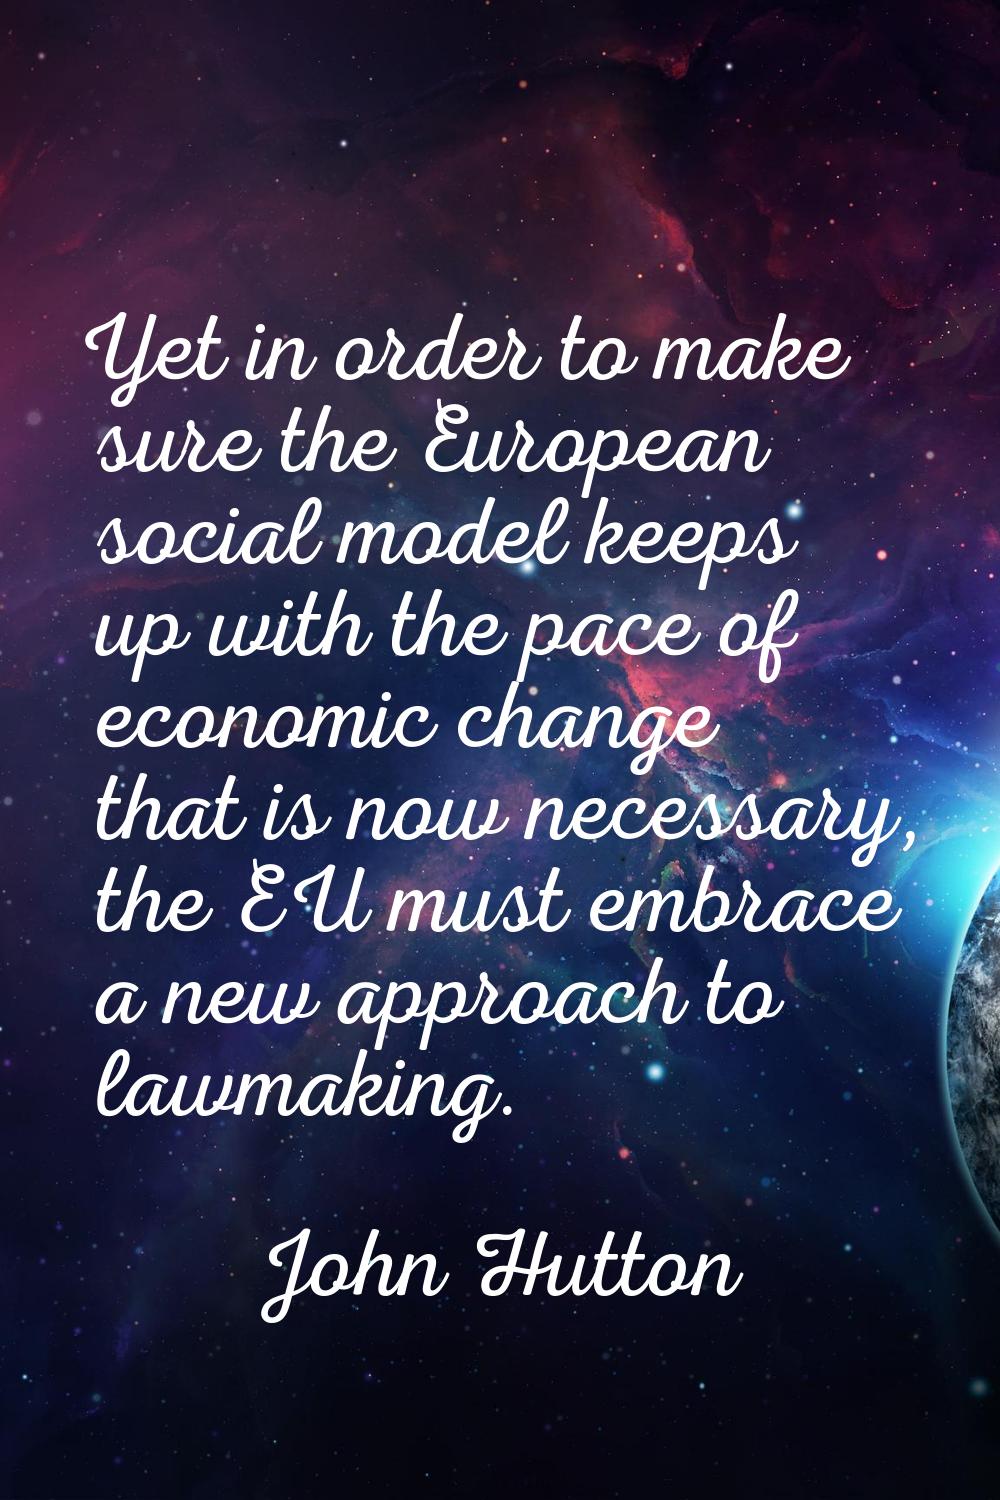 Yet in order to make sure the European social model keeps up with the pace of economic change that 